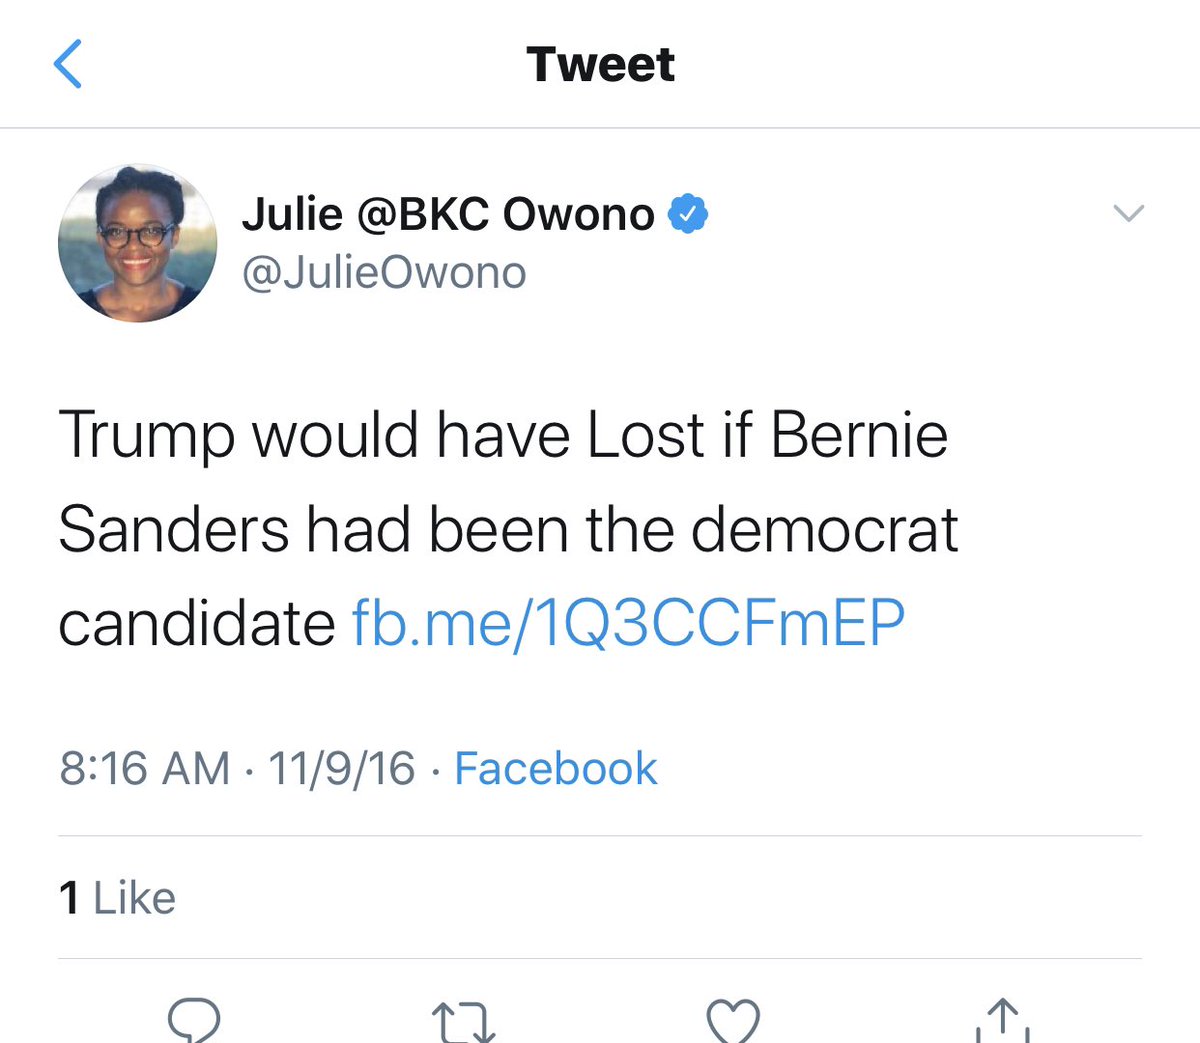 10. I’m just going down the line here, folks. And fitting right in is new Facebook Oversight Board Member - Julie Owono.She’s wishing for a quick and *four year* Trump presidency.Do these posts give you confidence that her censorship decisions won’t reflect a political bias?